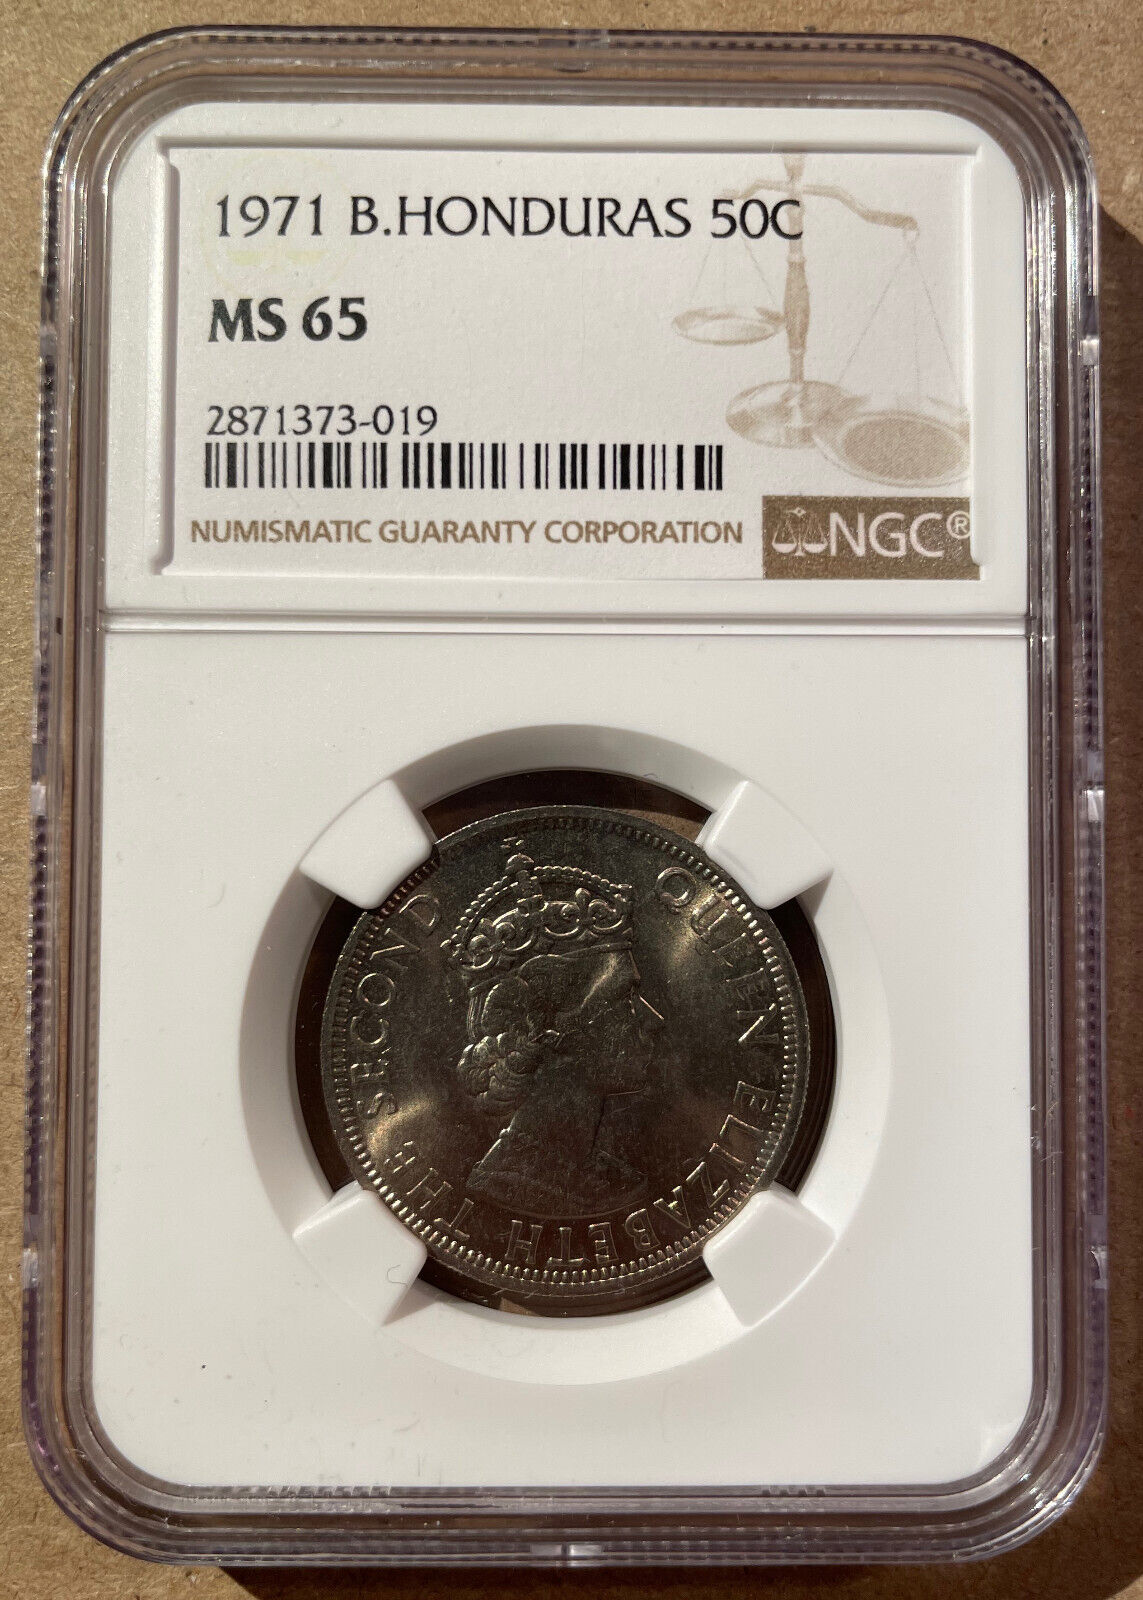 1971 BRITISH HONDURAS 50 CENTS NGC MS 65 - ONLY 1 in Higher Grade! Mint State!